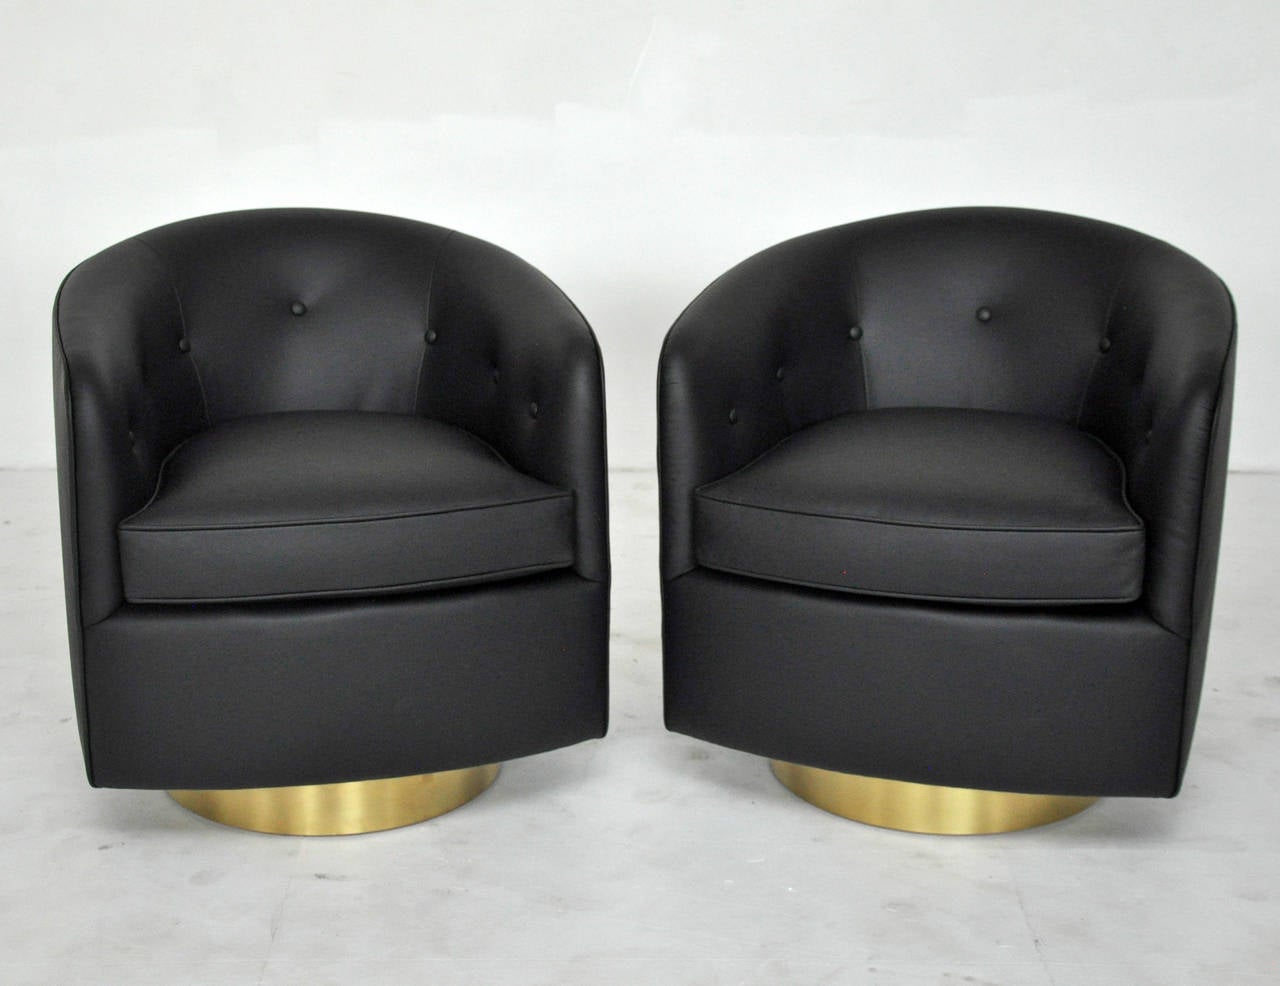 Pair of swivel chairs by Milo Baughman. Brass bases with new black leather upholstery. Fully restored.